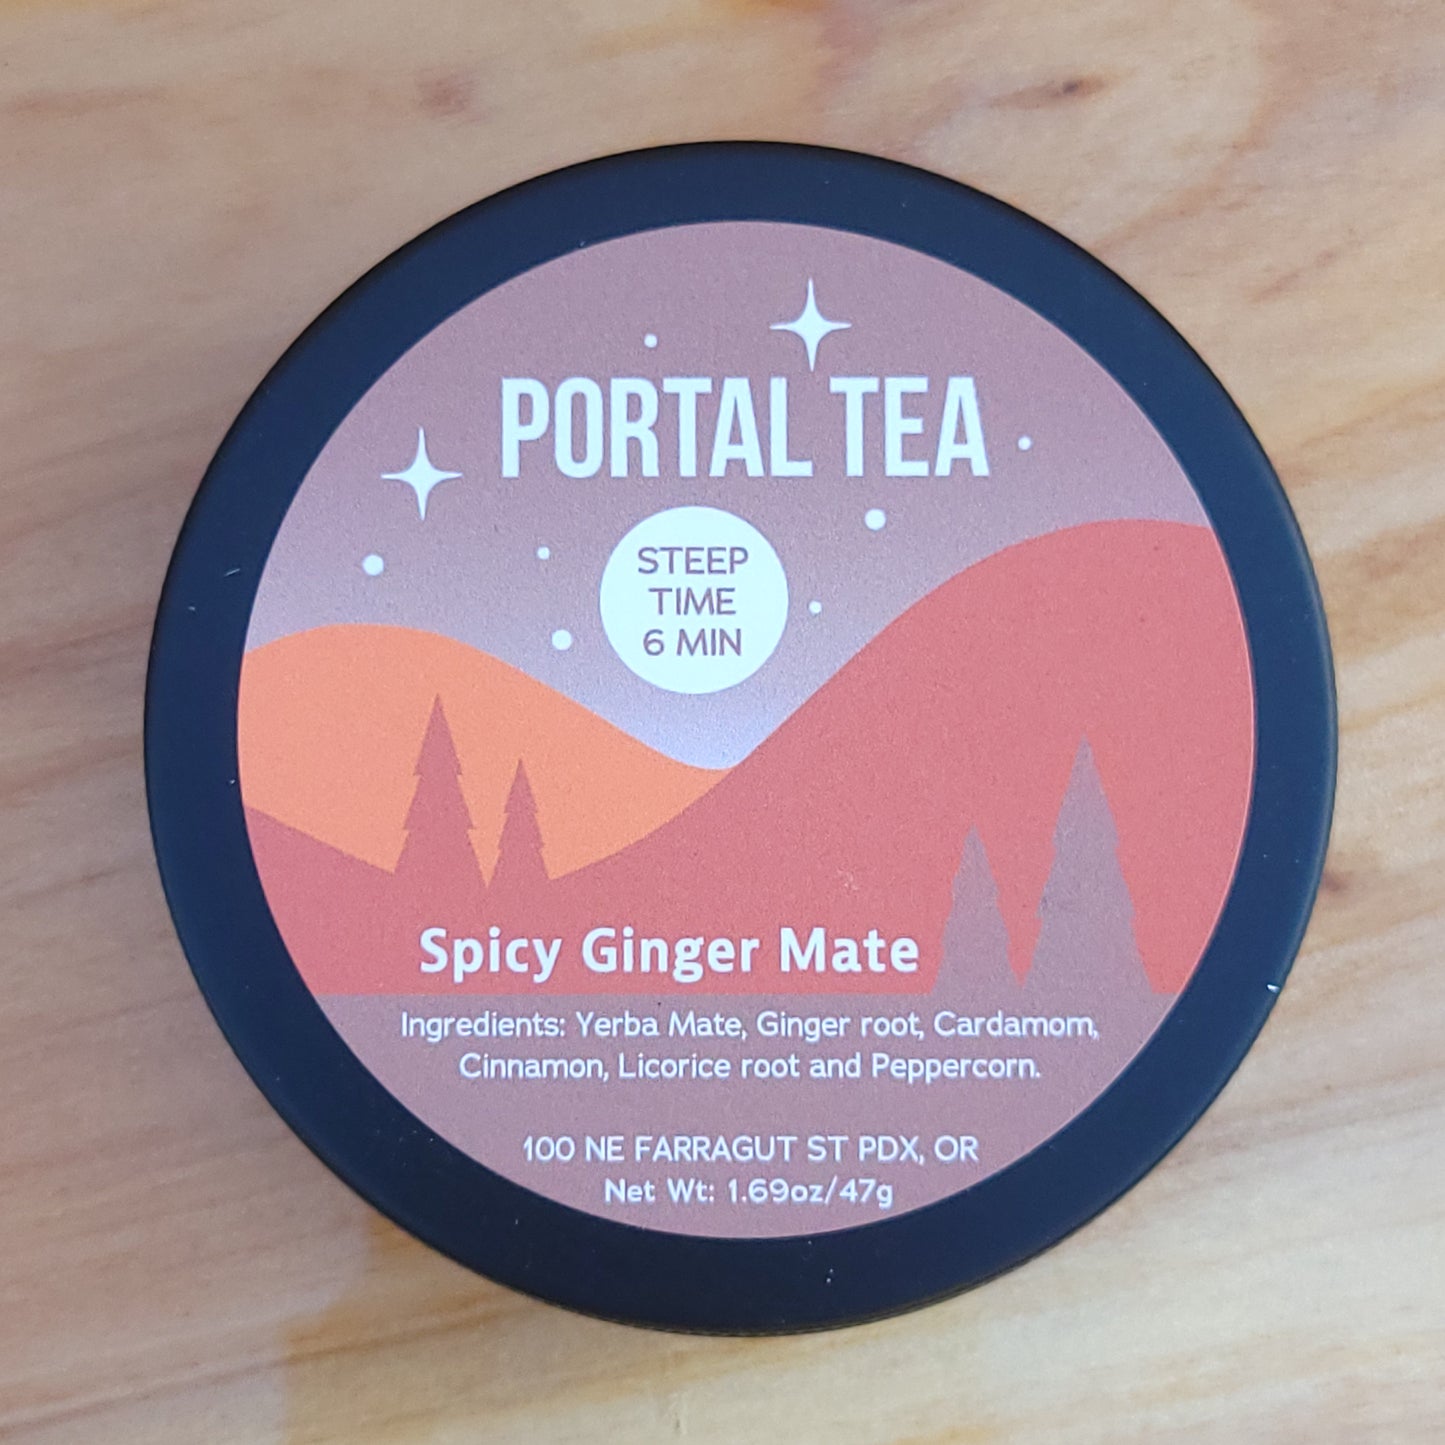 Spicy Ginger Mate